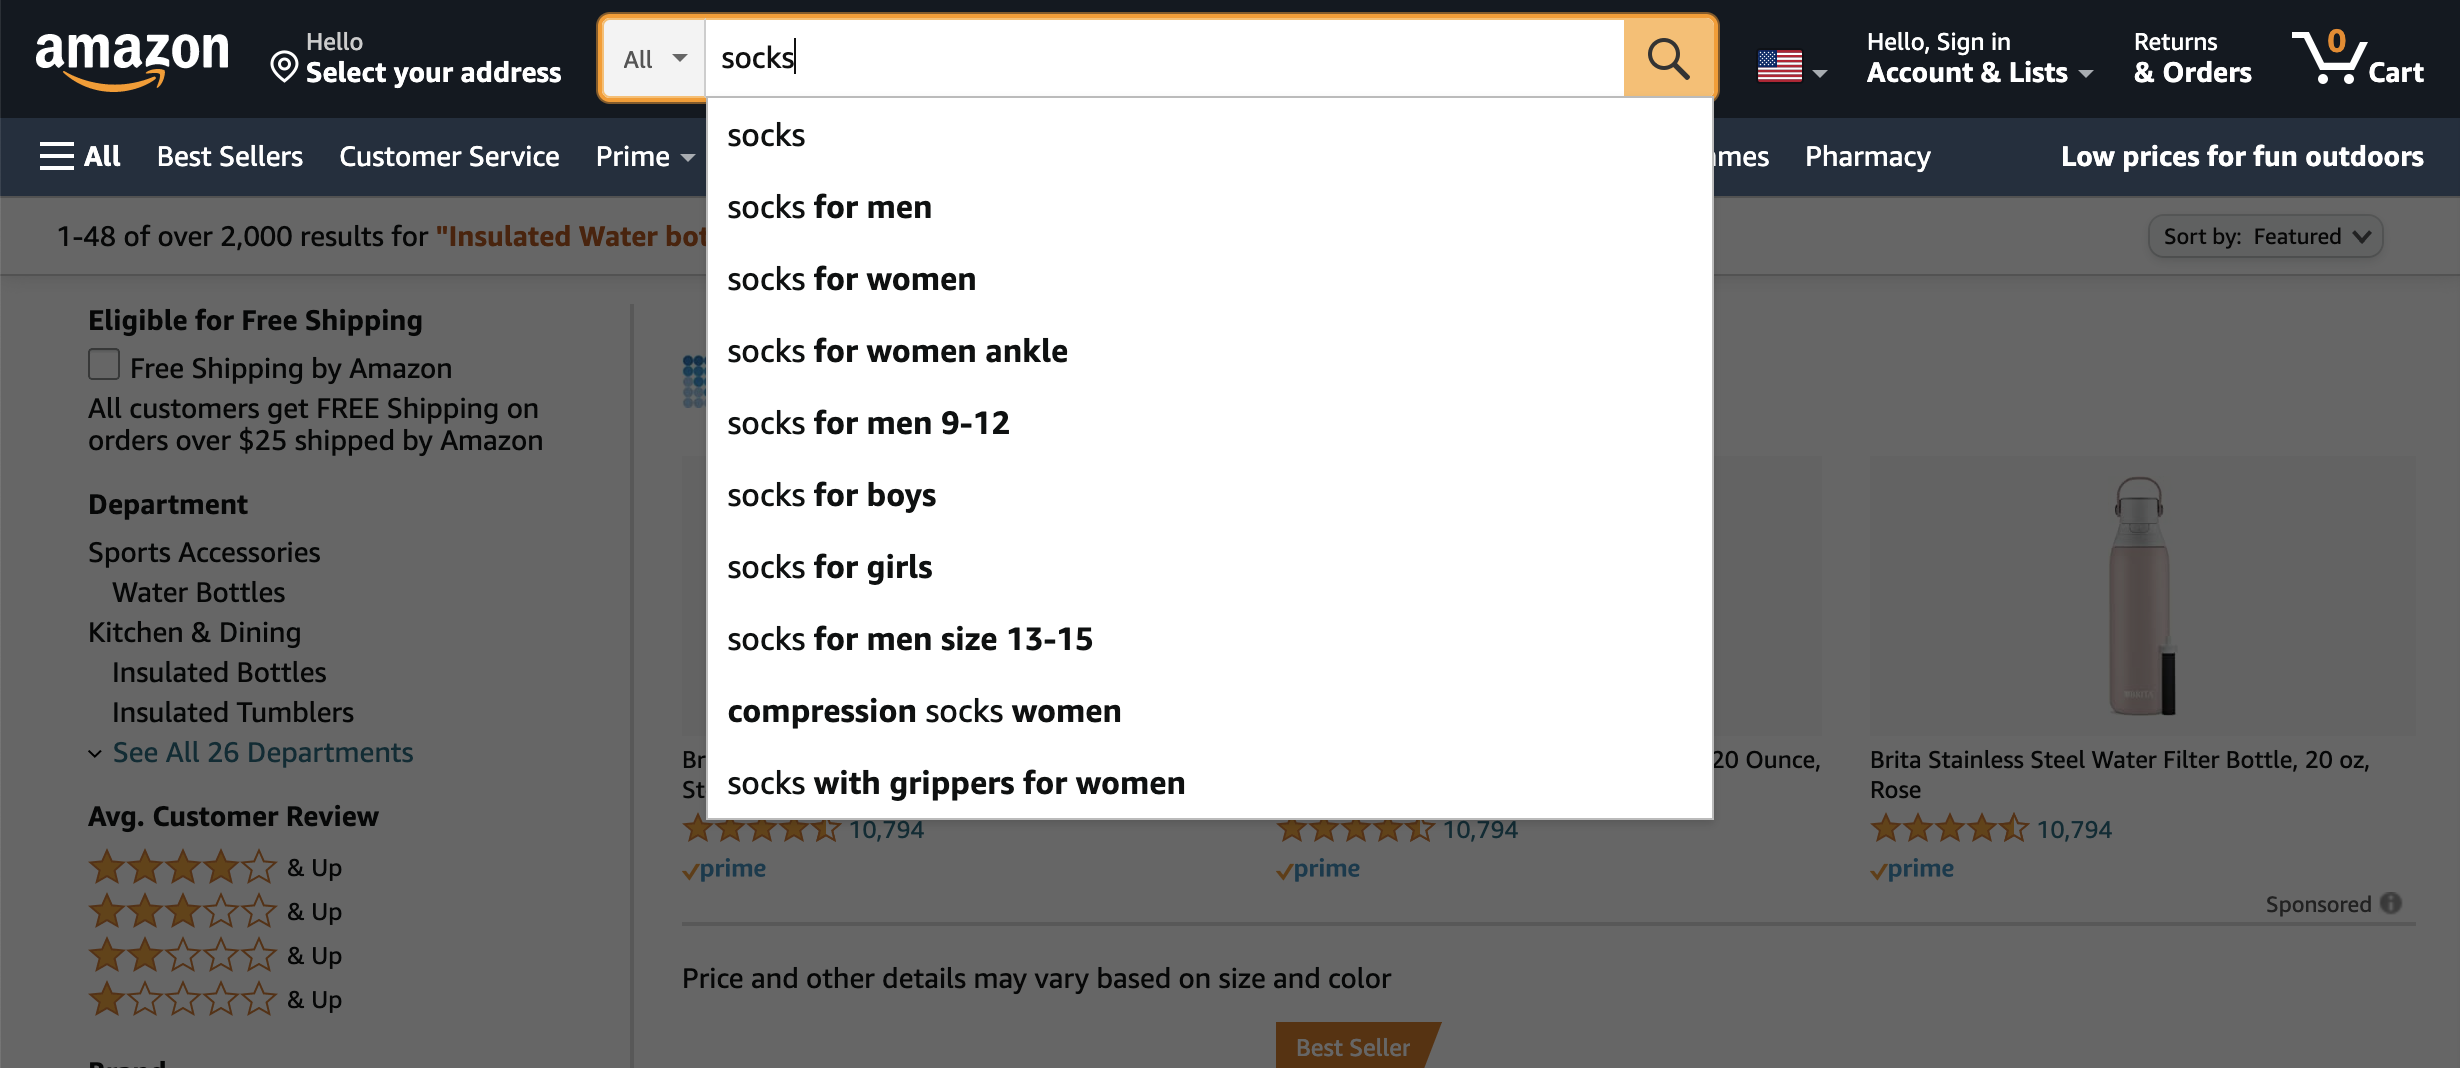 Amazon PPC ads: example of search results for socks on Amazon